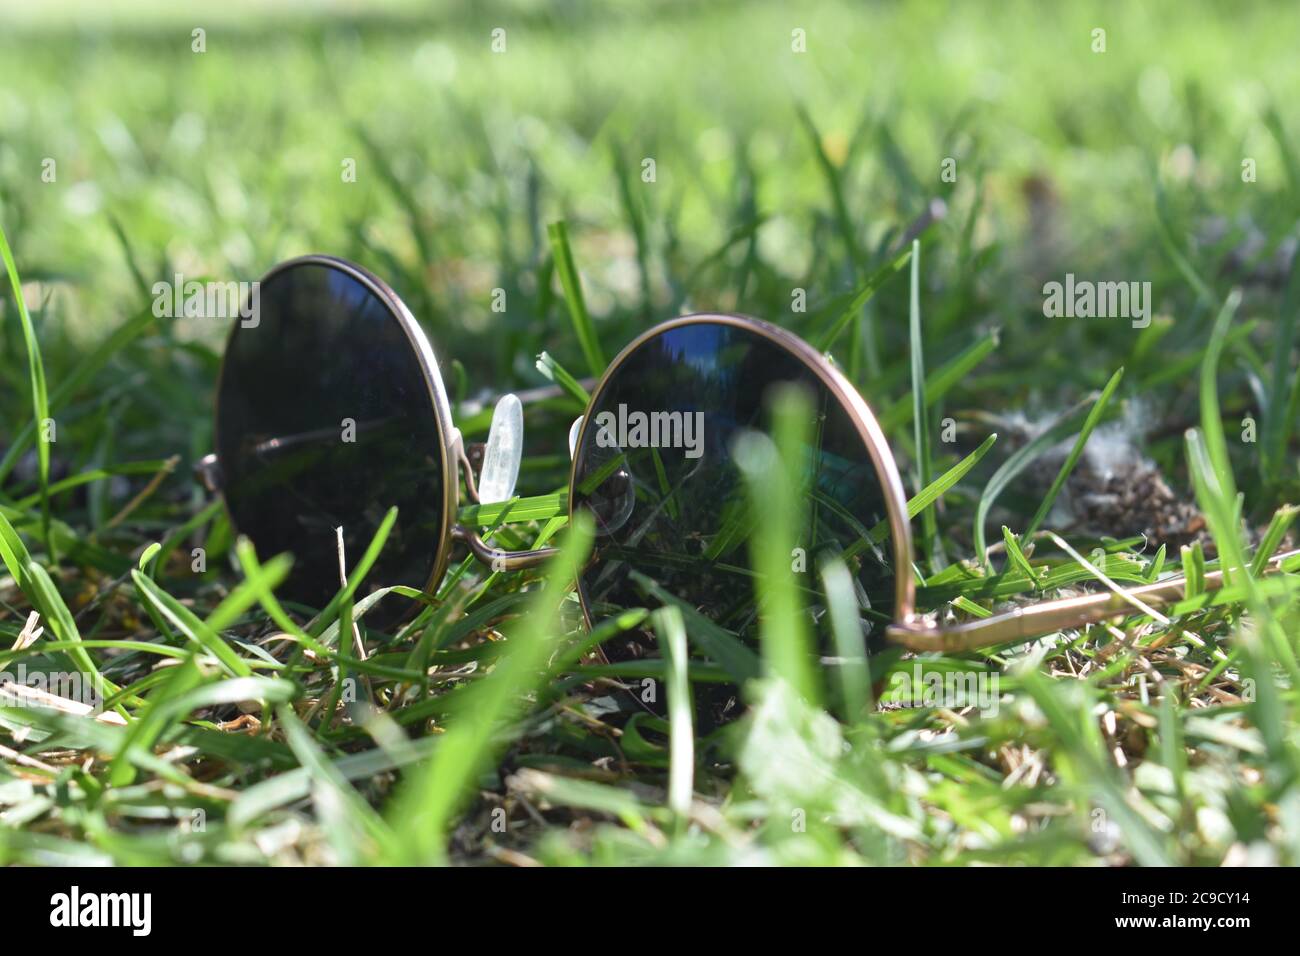 Sunglasses in the Grass in the Summer Stock Photo